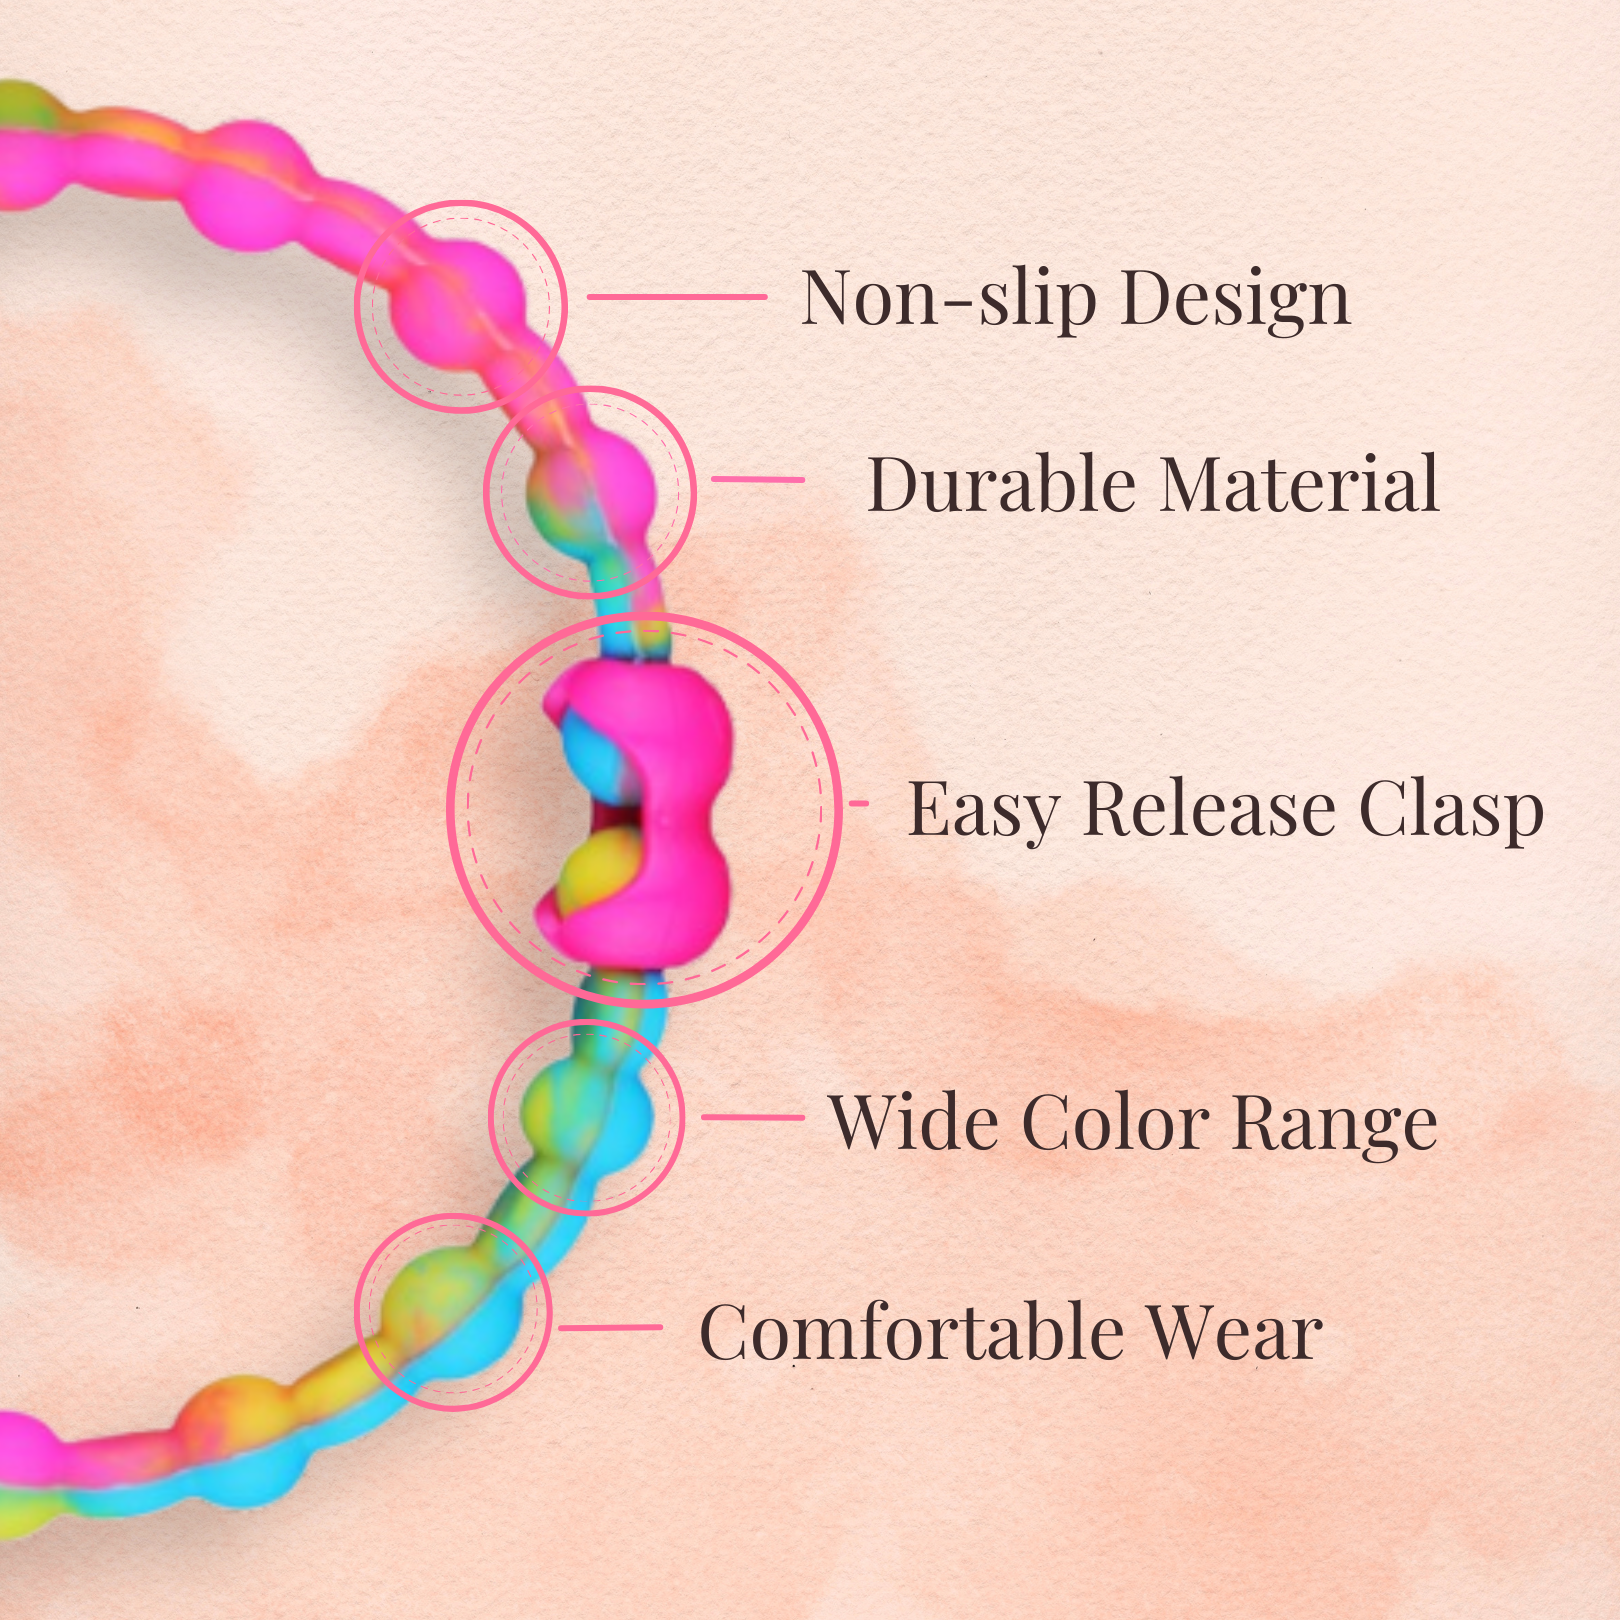 Aurora Dream Pack PRO Hair Ties: Easy Release Adjustable for Every Hair Type PACK OF 4